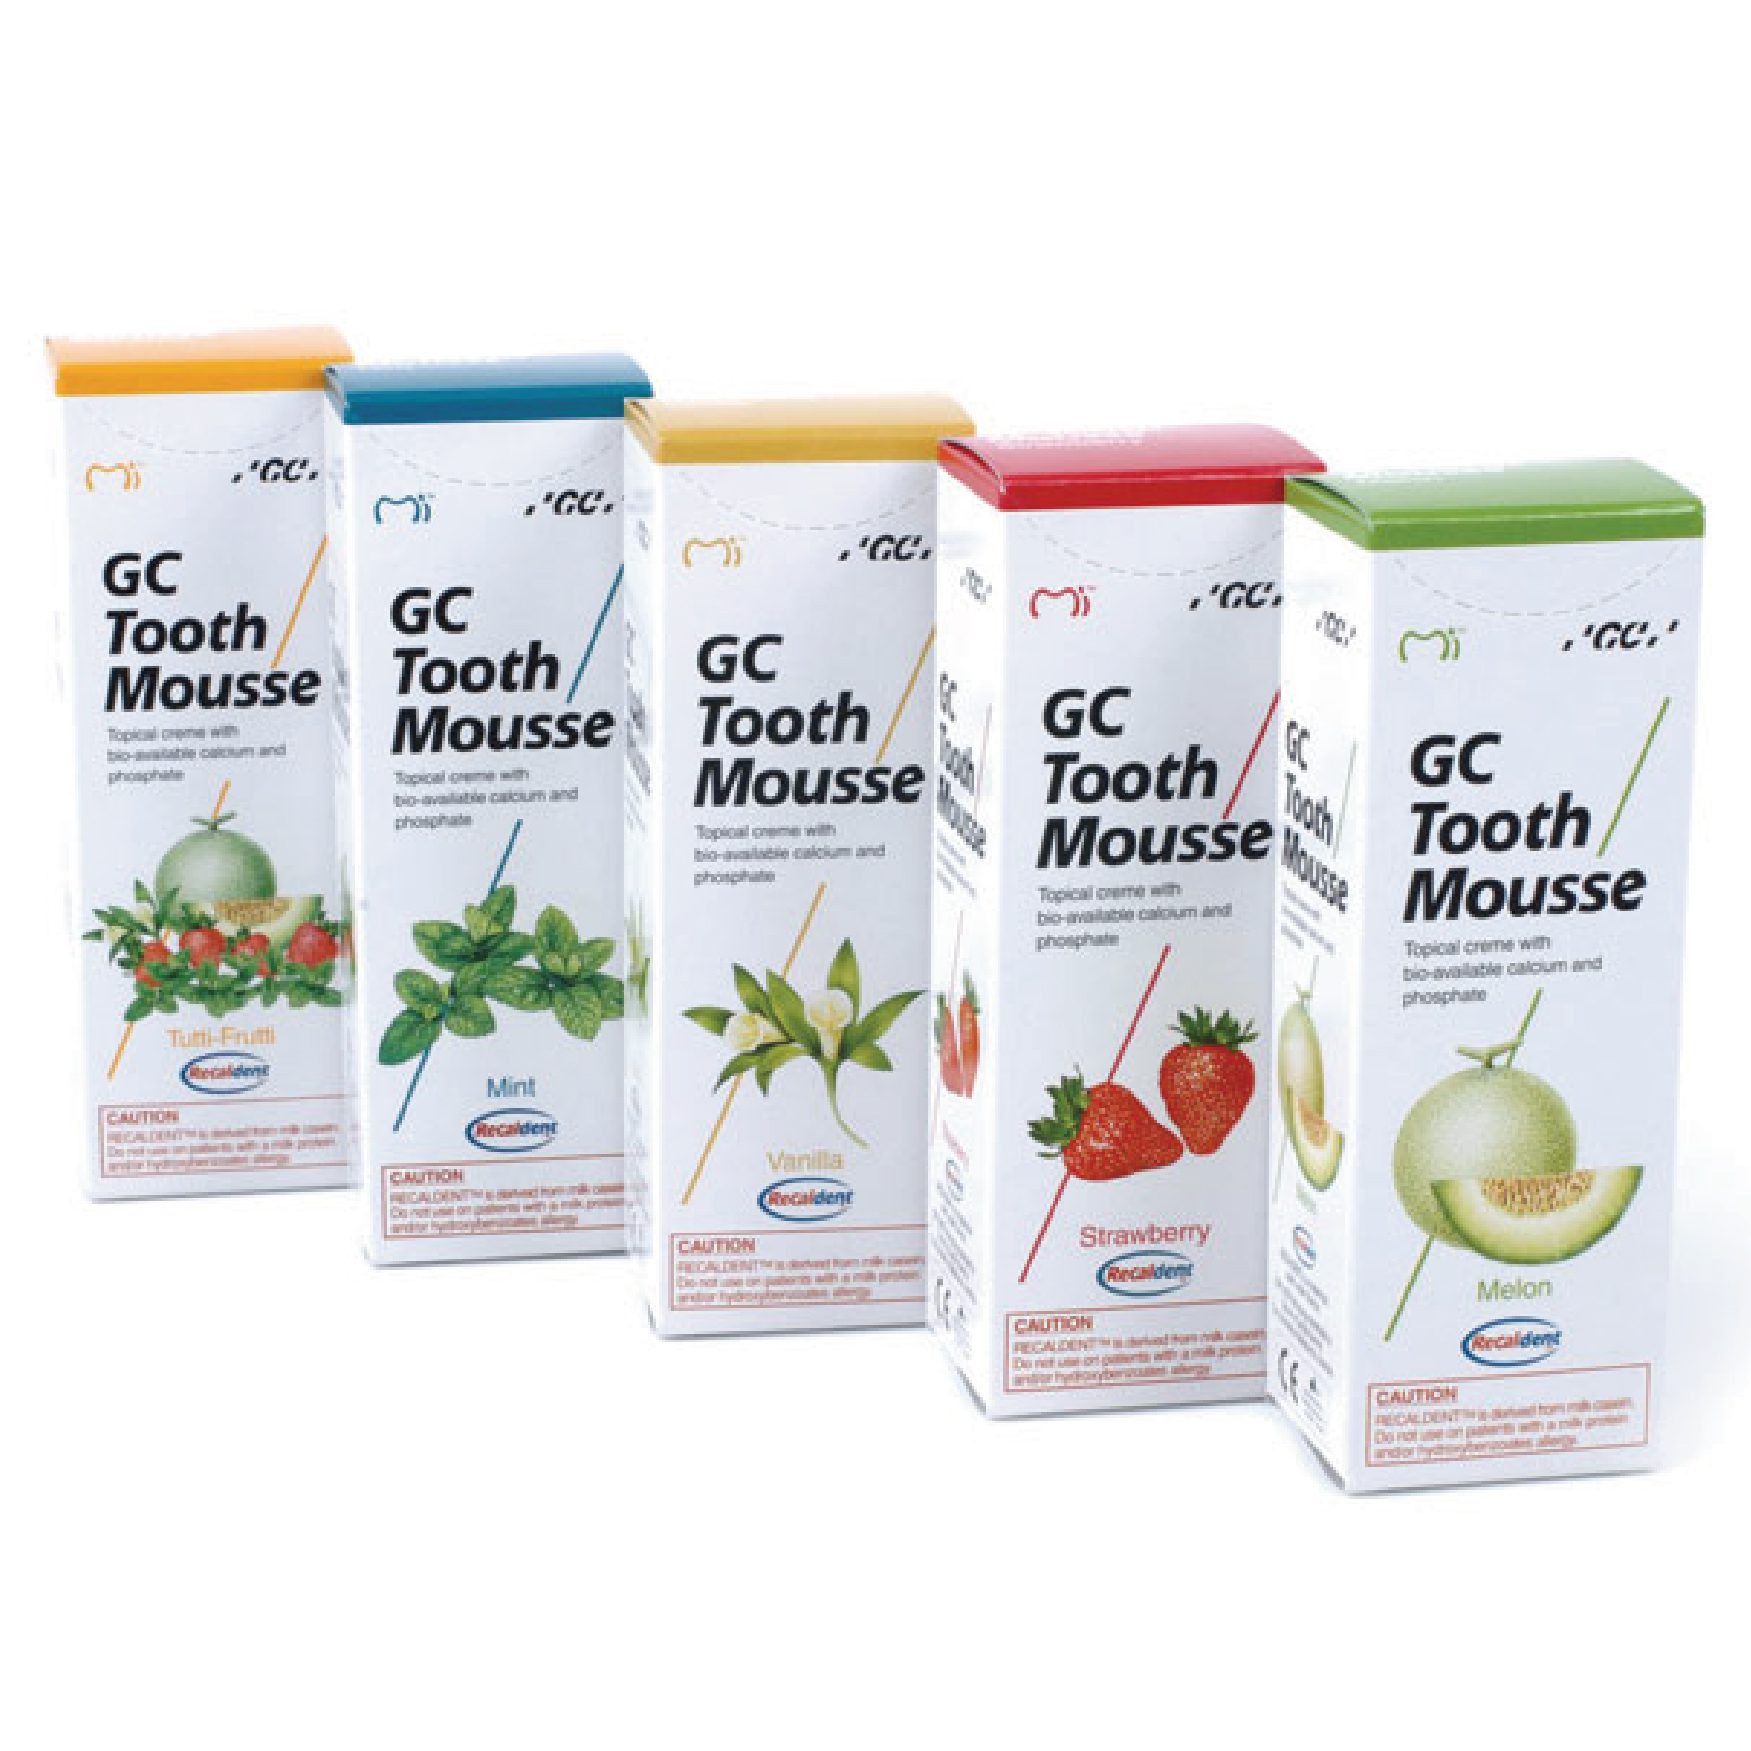 Product GC Tooth Mousse - Green Dental